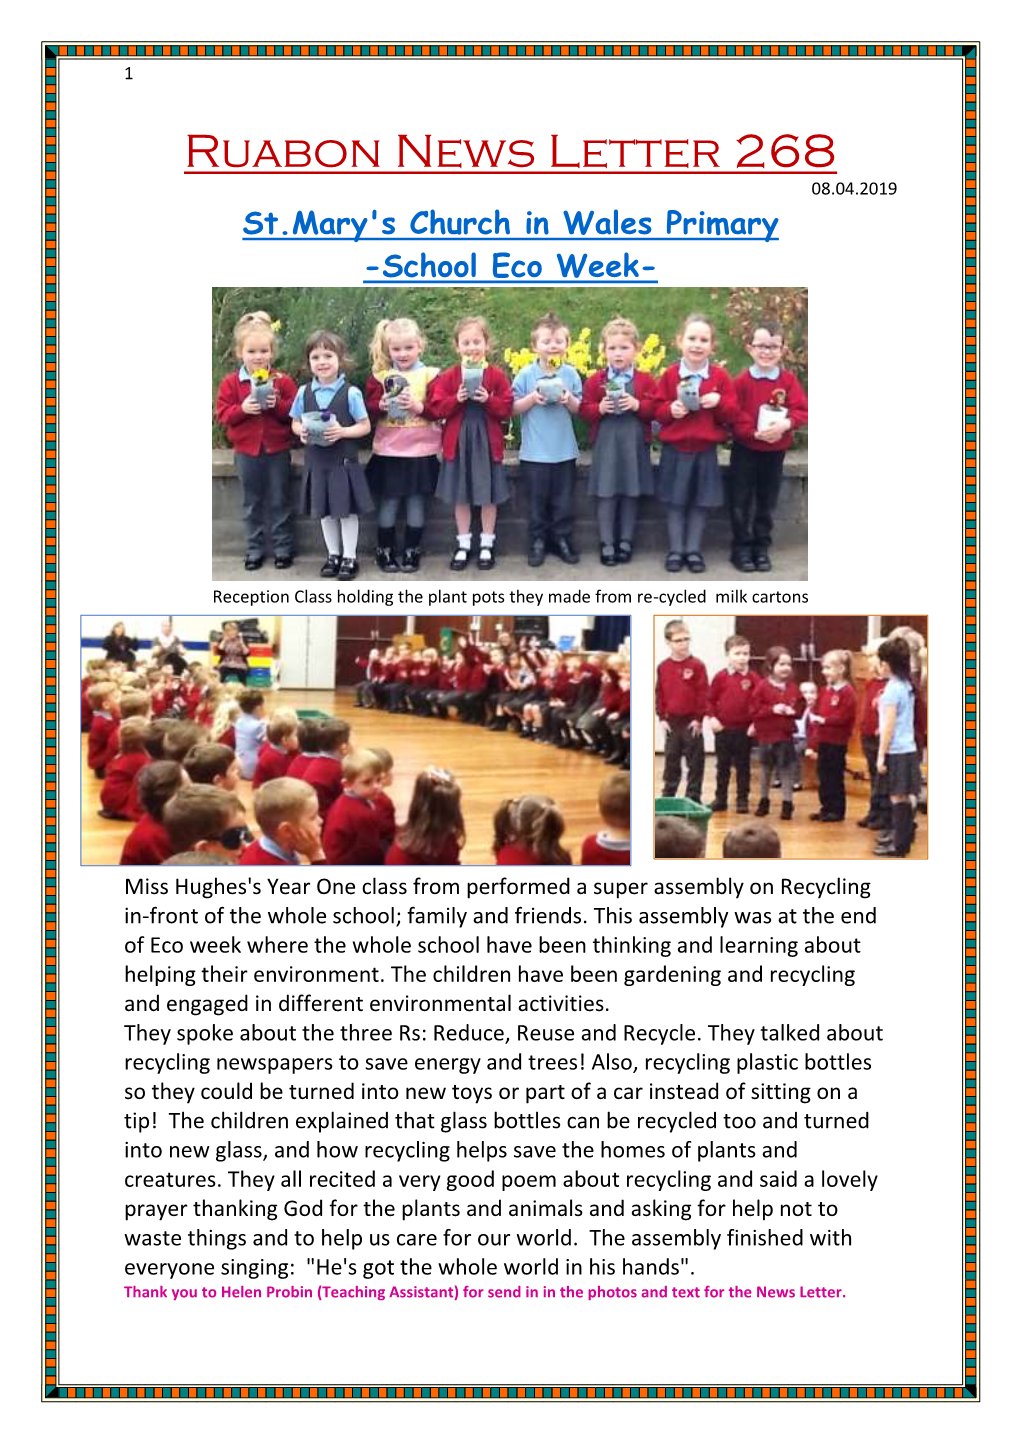 Ruabon News Letter 268 08.04.2019 St.Mary's Church in Wales Primary -School Eco Week